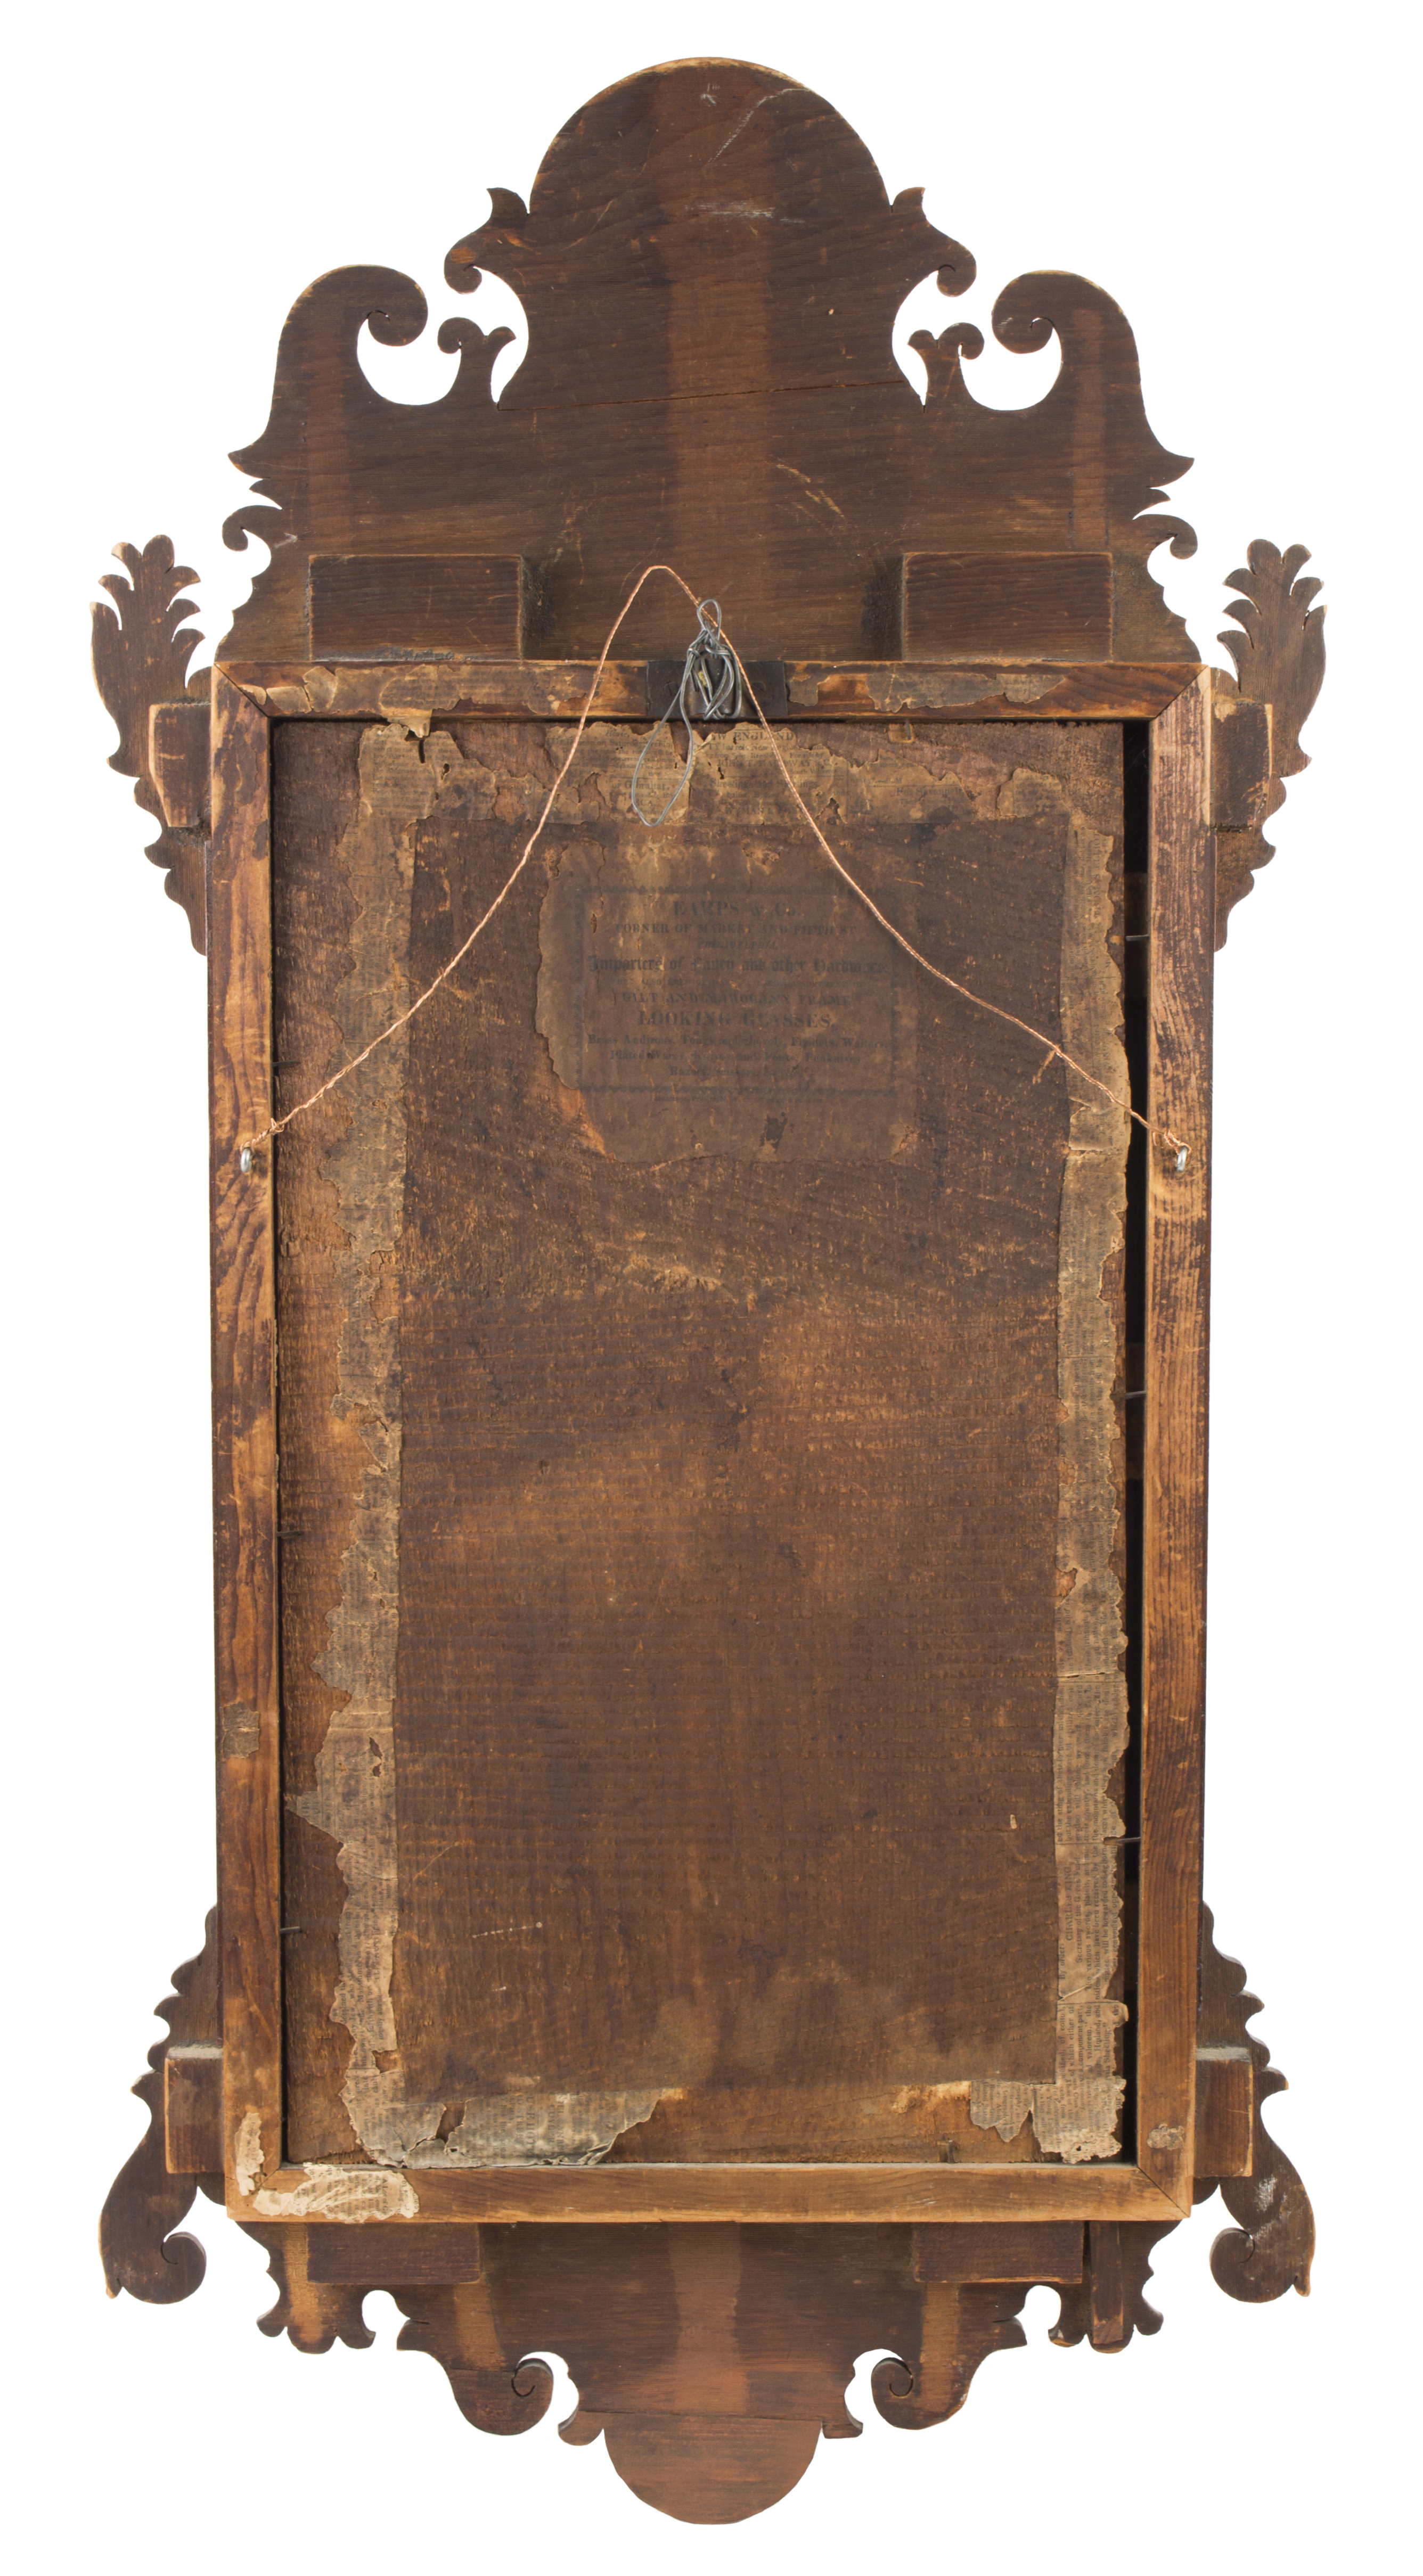 Antique Mirror, Chippendale Looking Glass, Retaining Label of Earps & Co., Philadelphia, Pennsylvania, back view